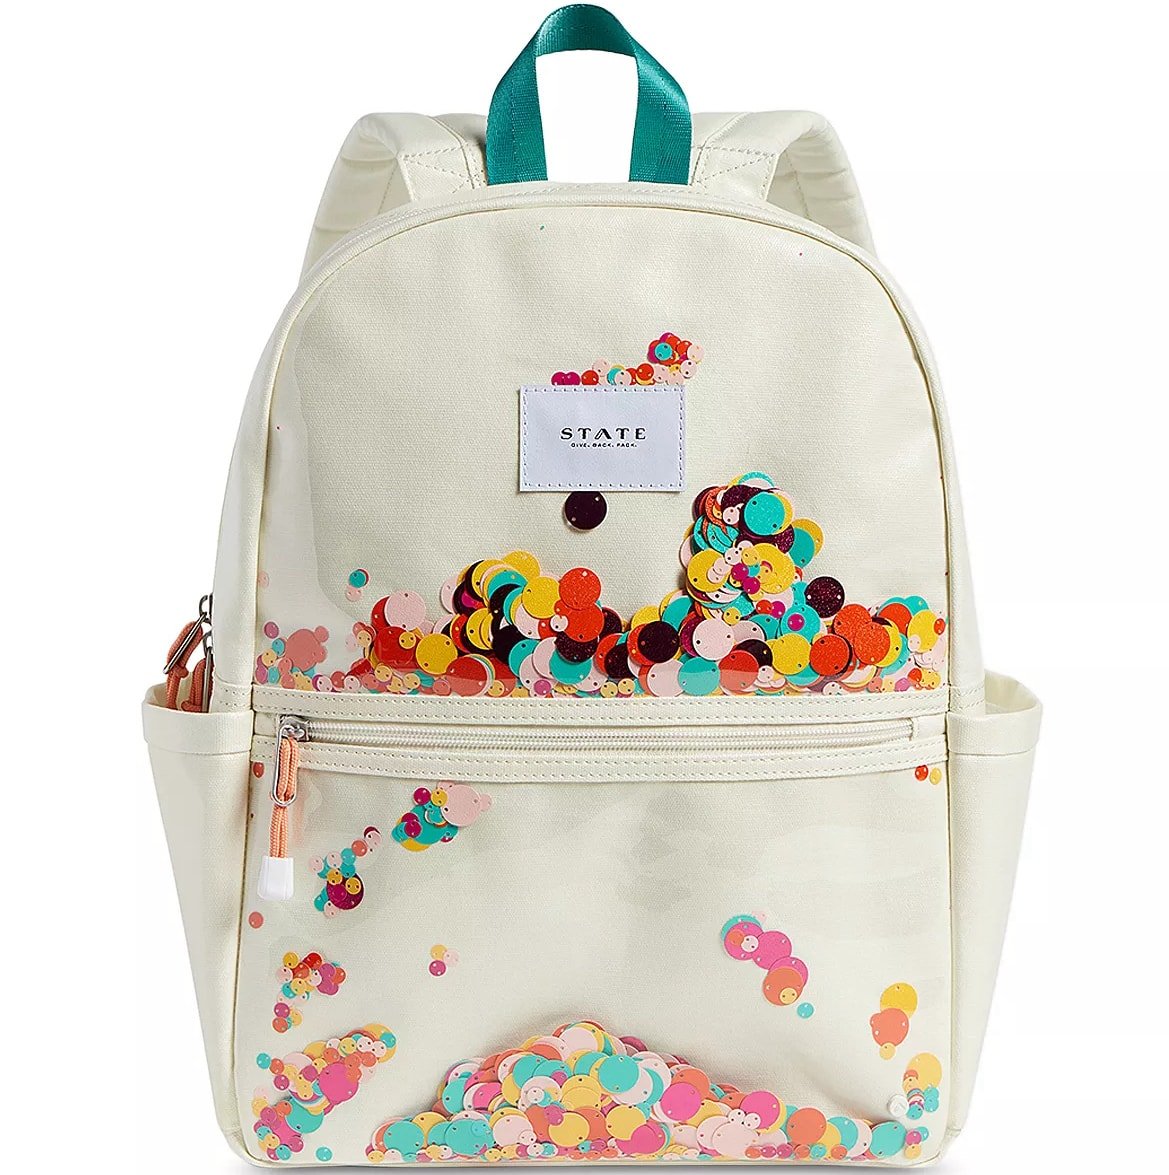 Beige backpack with colorful confetti from State Bags